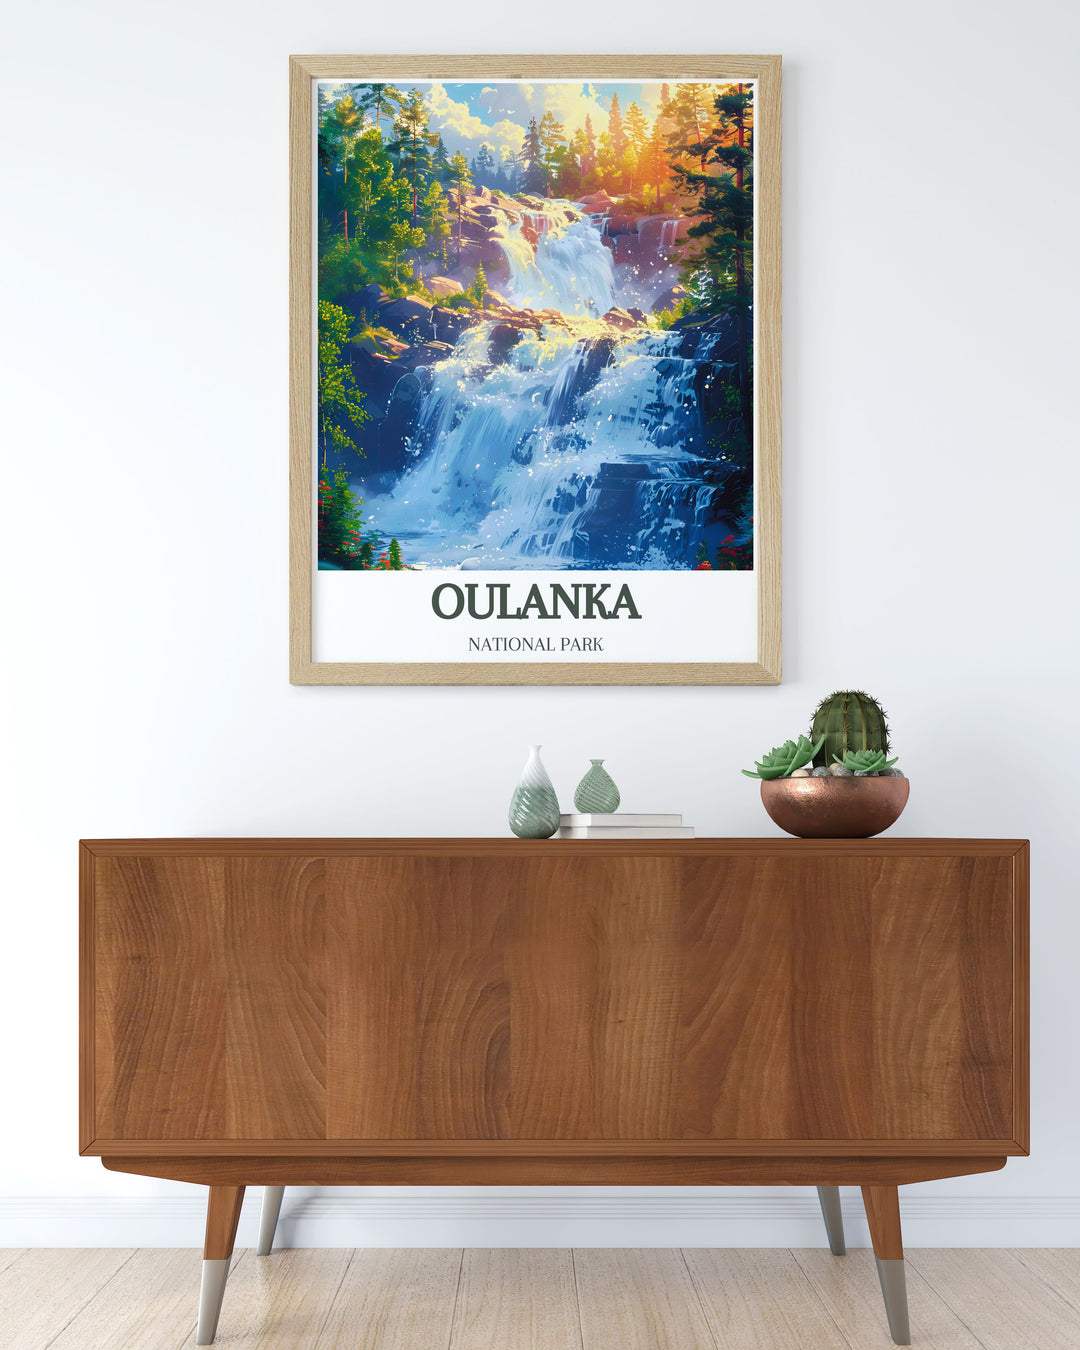 National Park Print of Kiutakongas Rapids designed to transport viewers to the heart of Oulanka National Park capturing the essence of Finland natural beauty making it an ideal addition to any wall art collection